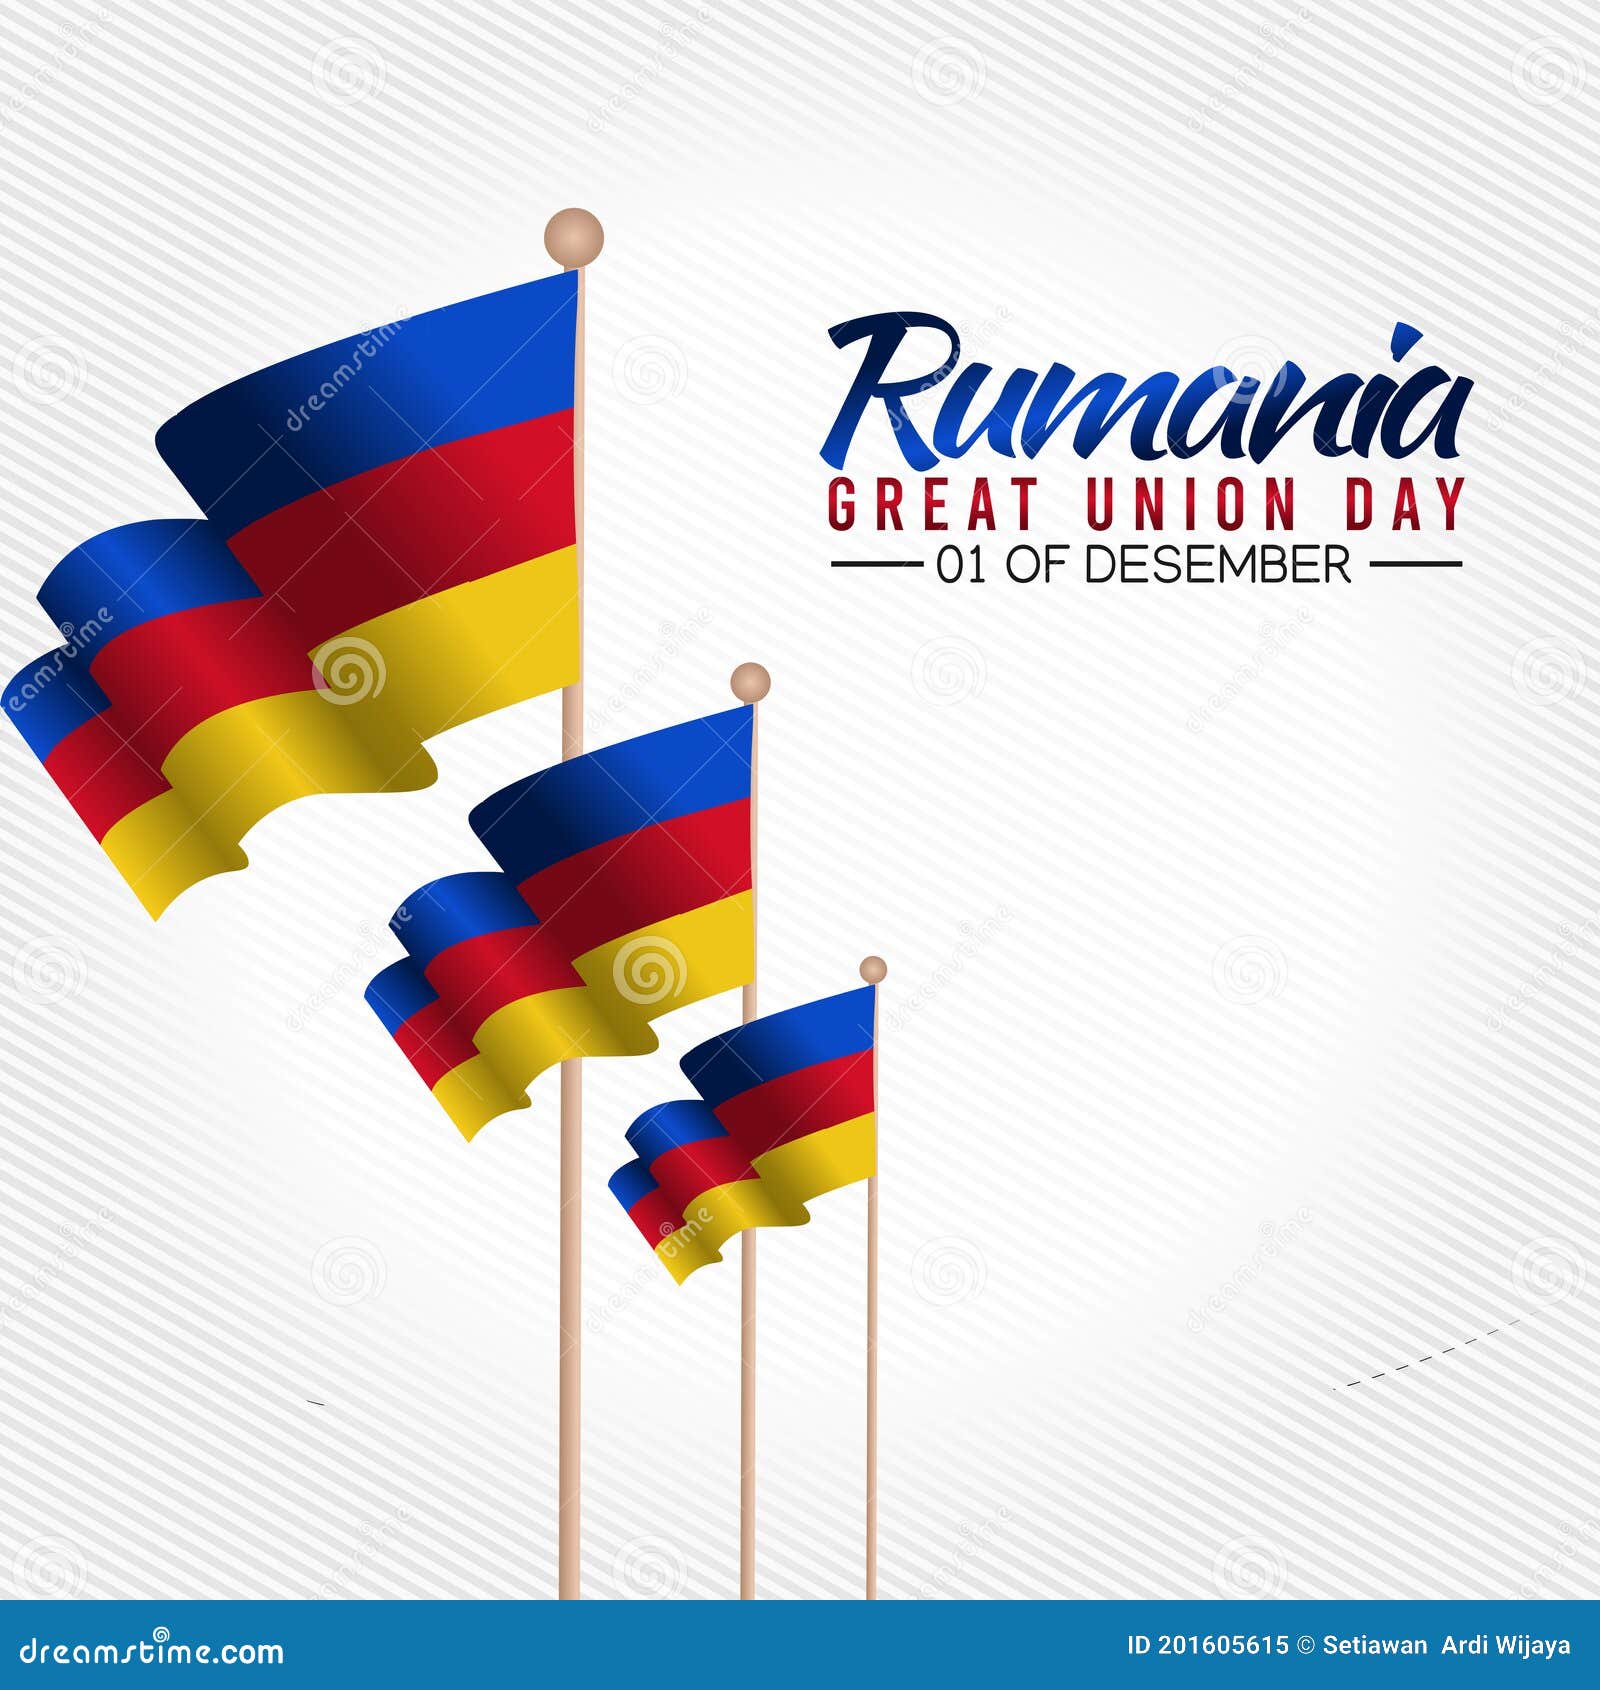  graphic of rumania great union day